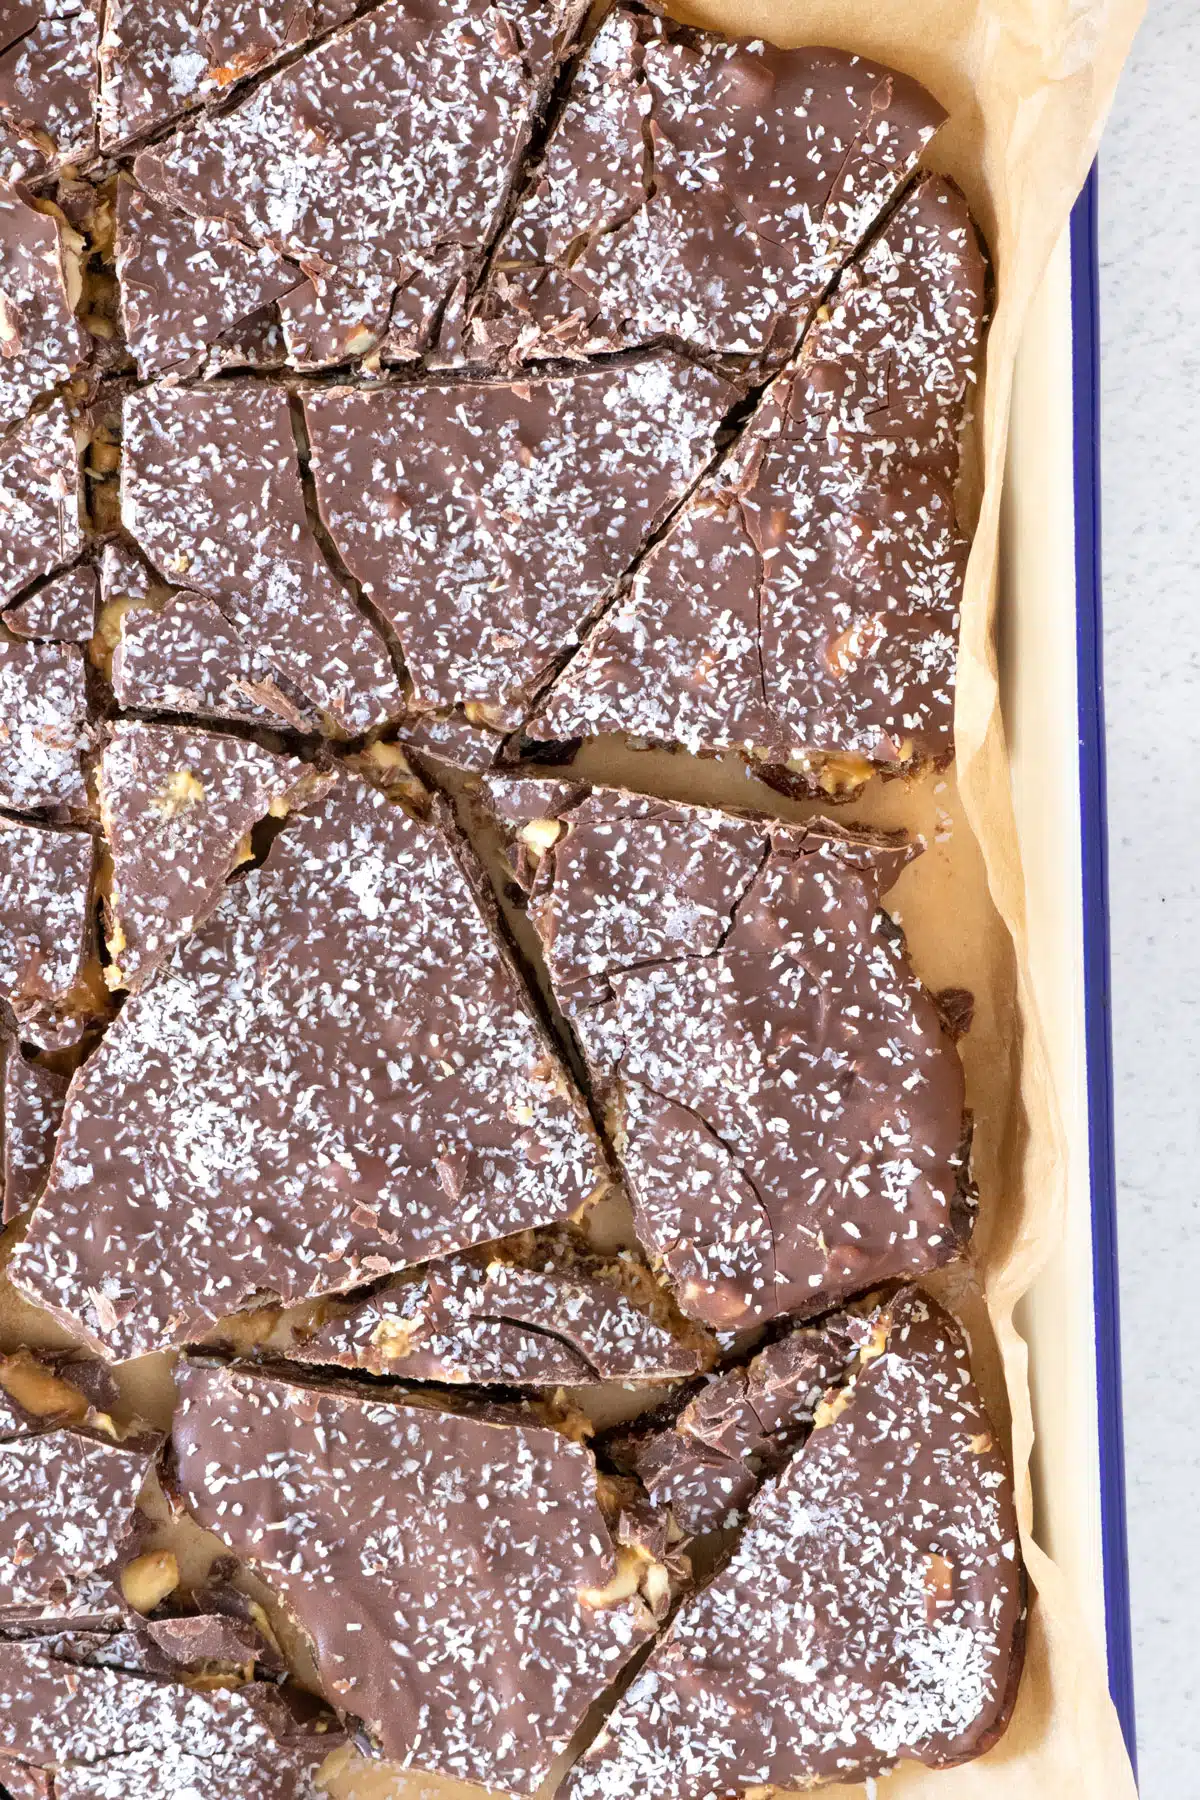 Easy Chocolate date bark has been chopped up in various shapes and is sitting on brown baking paper on a white tray with blue trim. The top has been sprinkled with coconut.